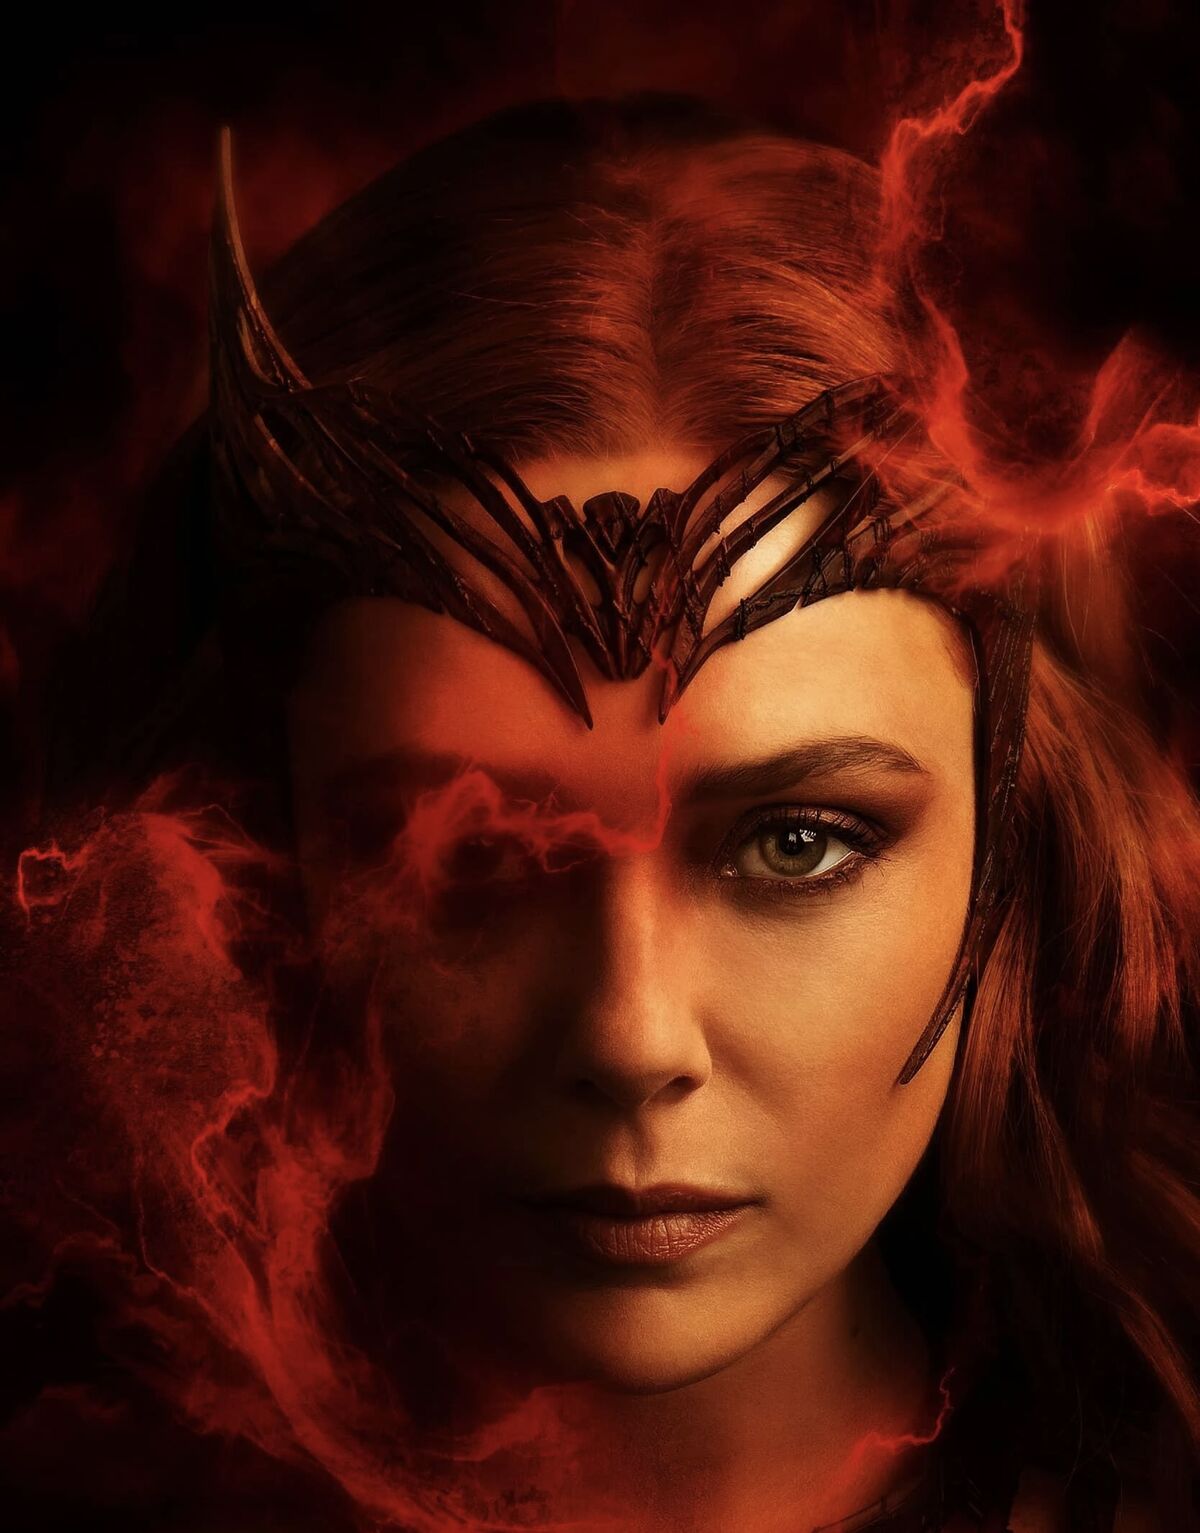 What are some feats of Wanda Maximoff (aka. 'Scarlet Witch') in